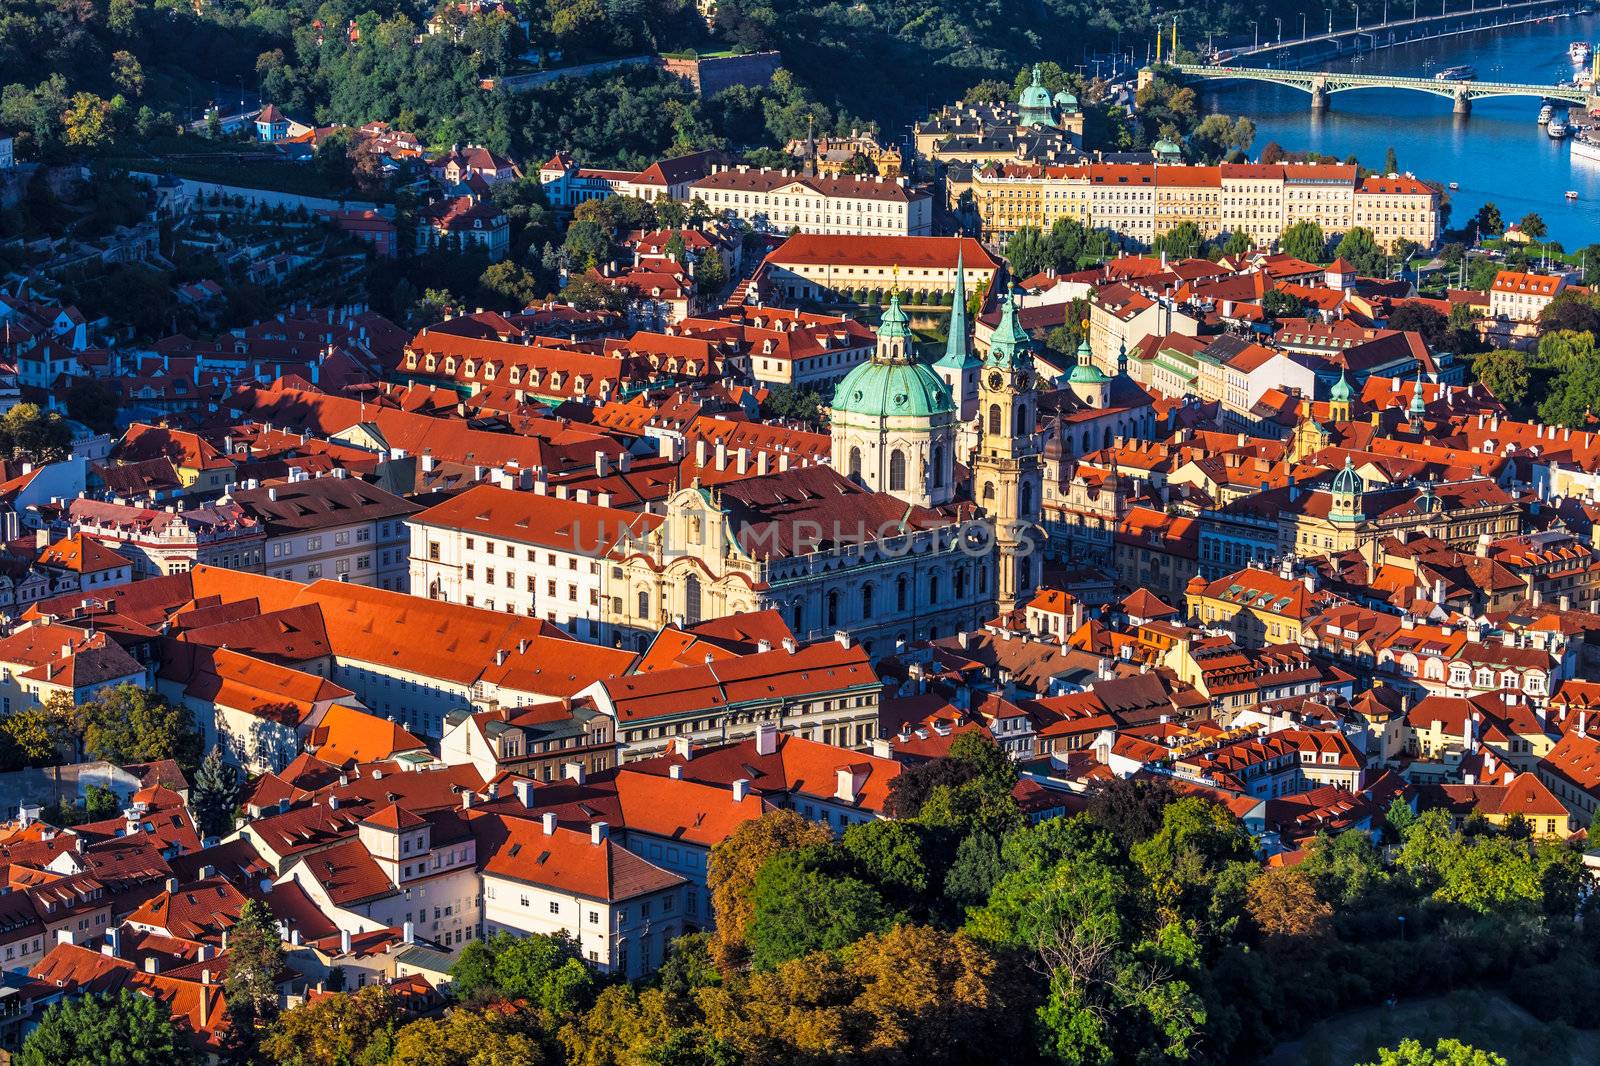 Aerial view of Mala Strana in Prague, with the Church of St. Nicholas